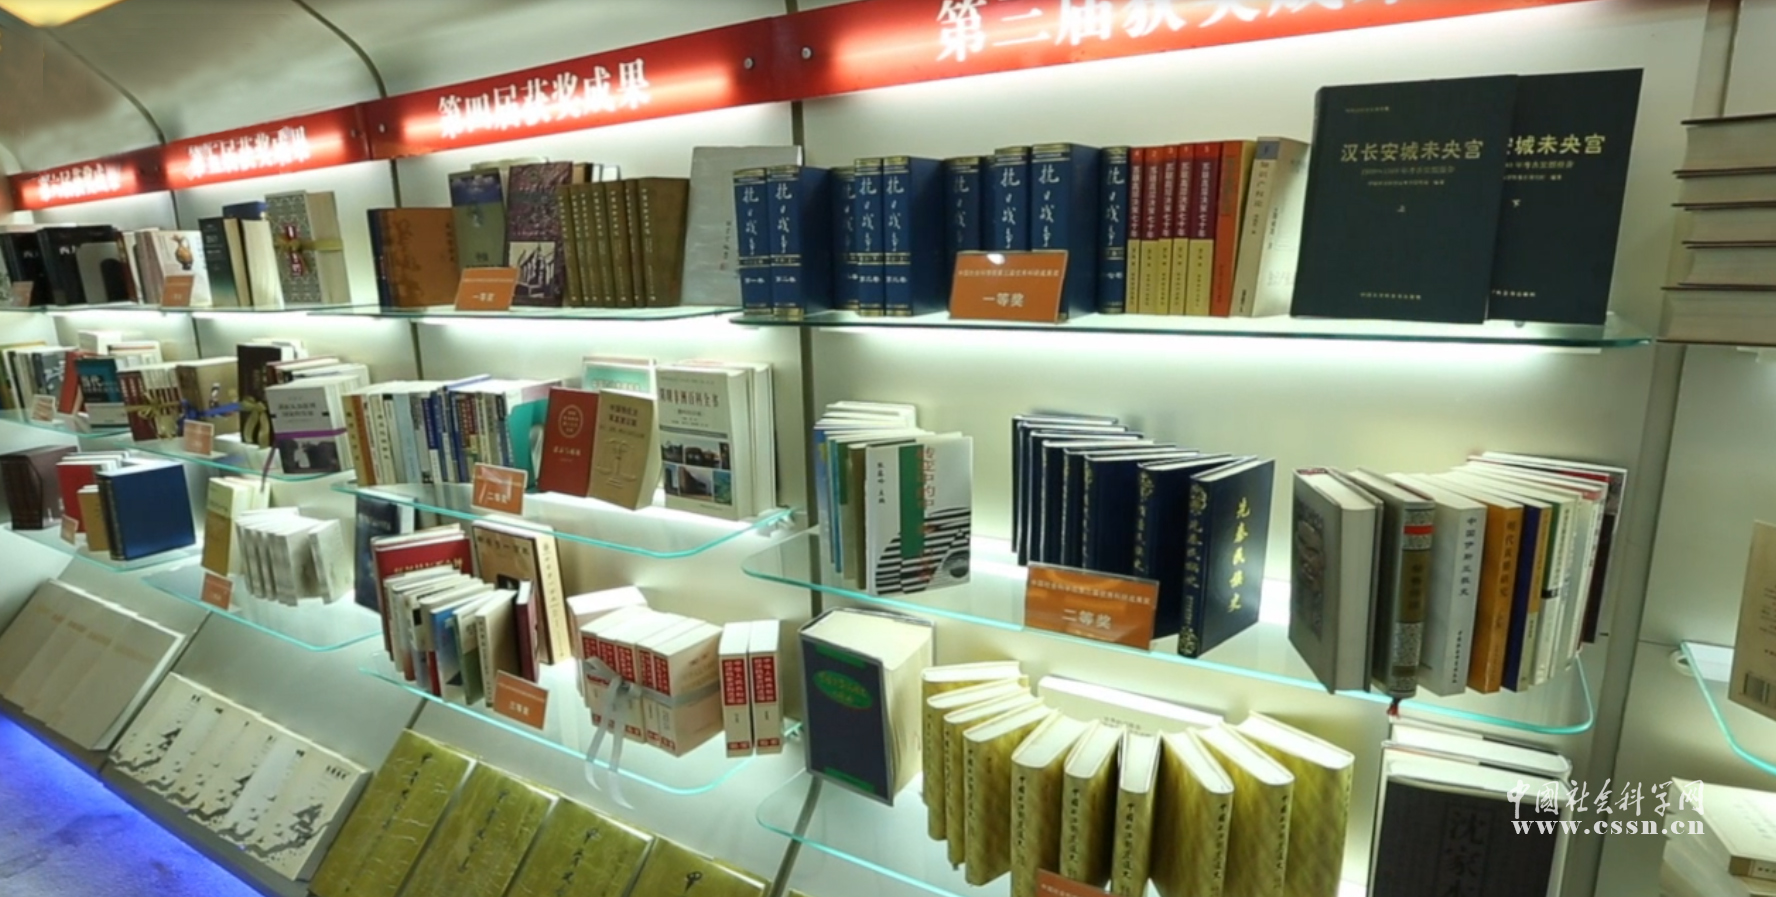 Some academic books by the Chinese Academy of Social Sciences. [Photo: cass.cssn.cn]